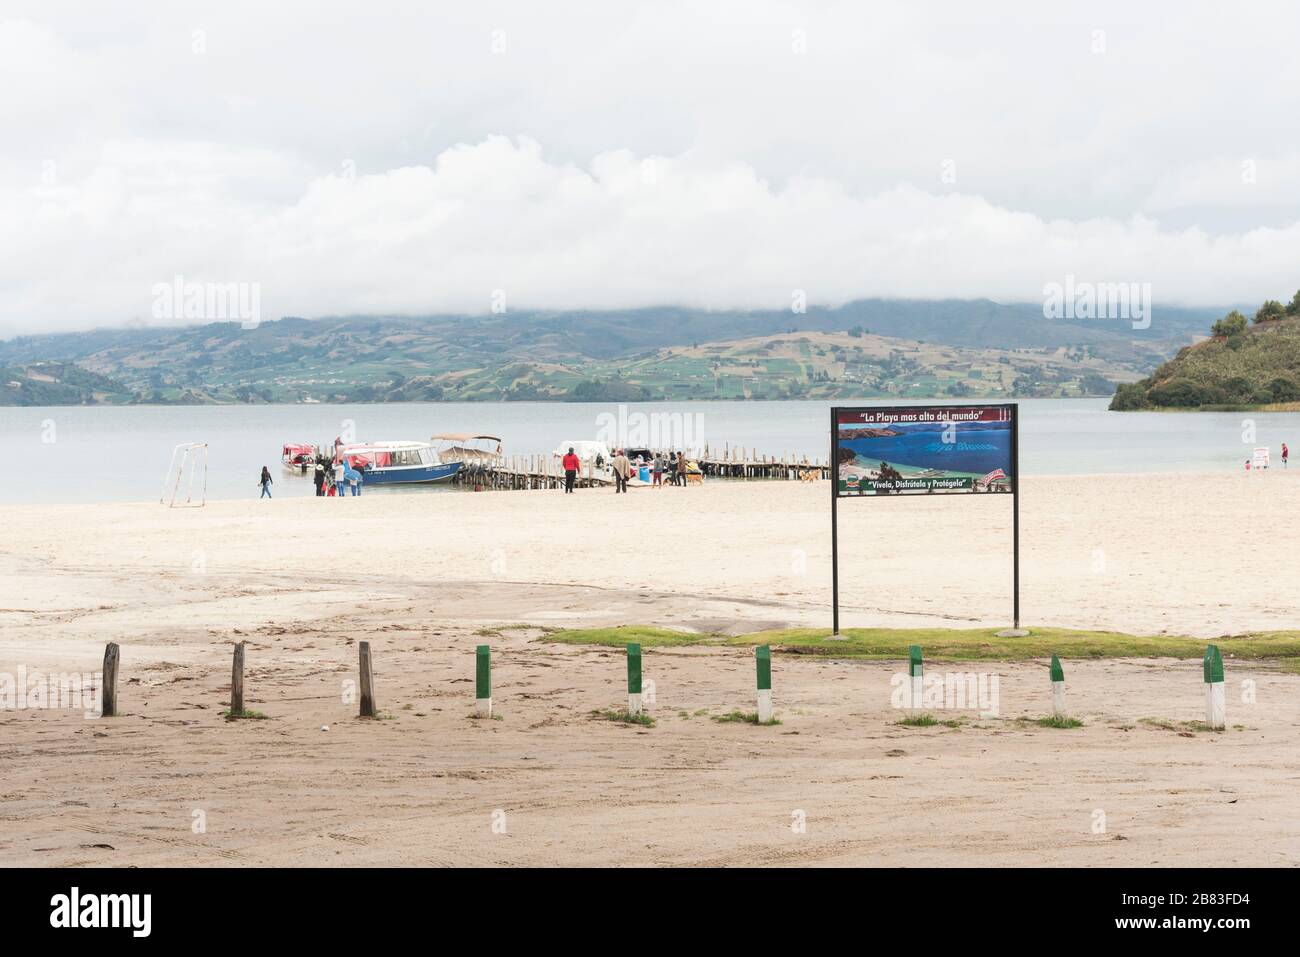 Lake Tota, Boyaca / Colombia: April 7, 2018: Informational sign on the shore of the largest lake in Colombia: Playa Blanca, the highest beach in the w Stock Photo